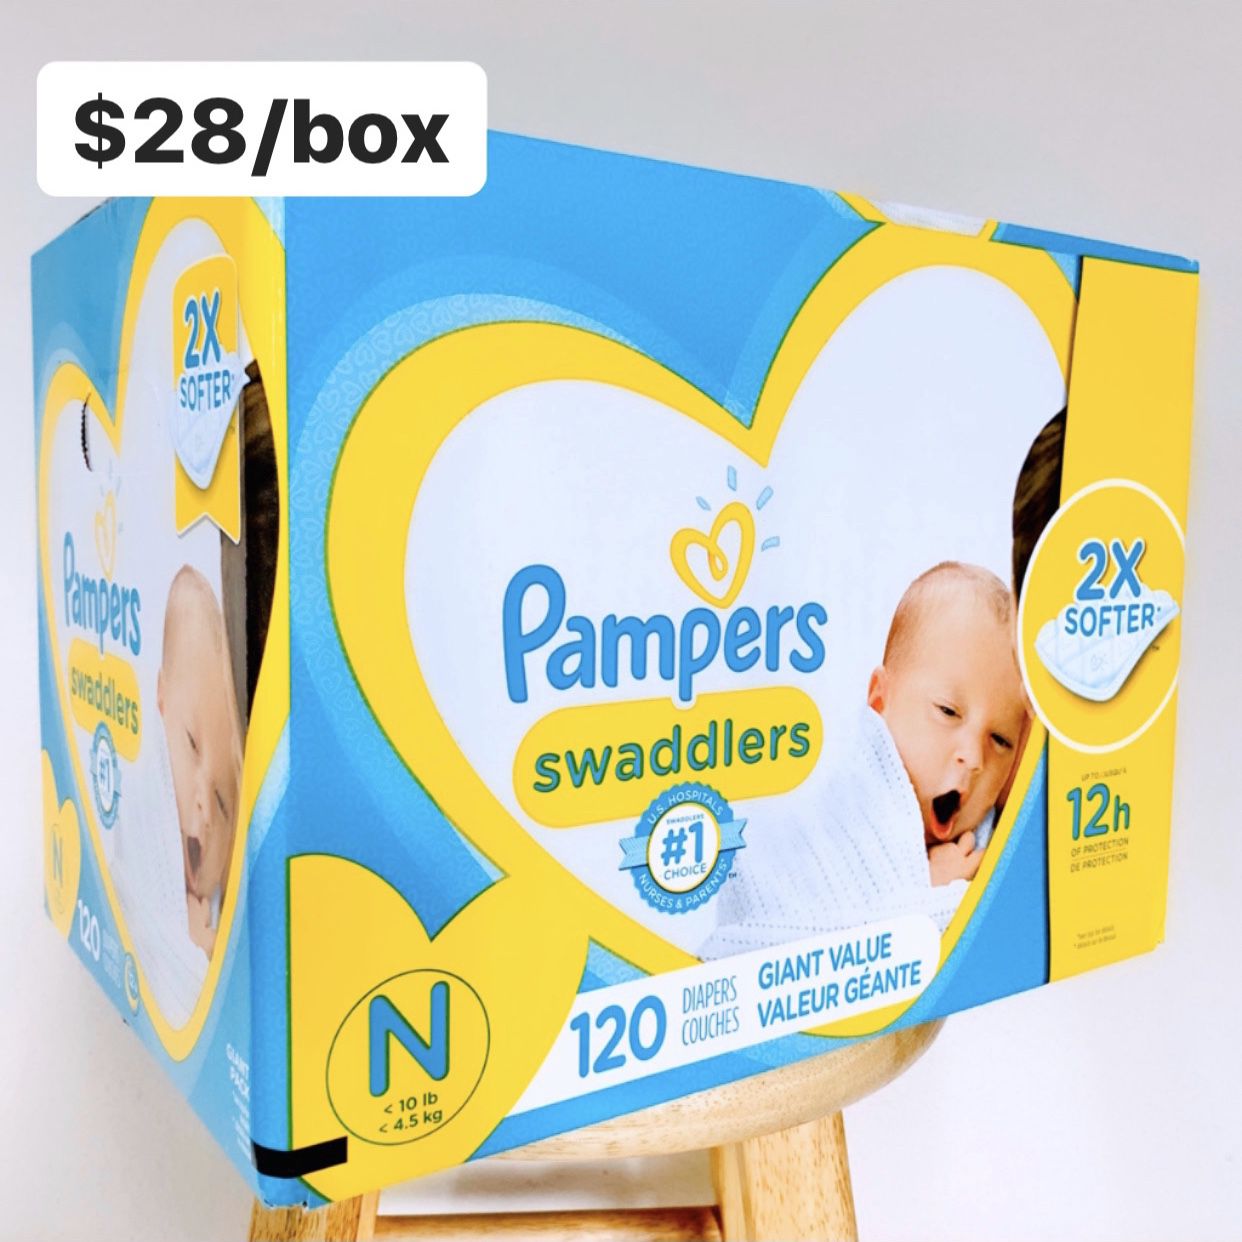 Newborn (Up to 10lbs) Pampers Swaddlers (120 baby diapers) *PROMO* BUY ANY 2 PAMPERS BRAND BIG BOXES, GET 1 FREE HUGGIES TUB 64ct